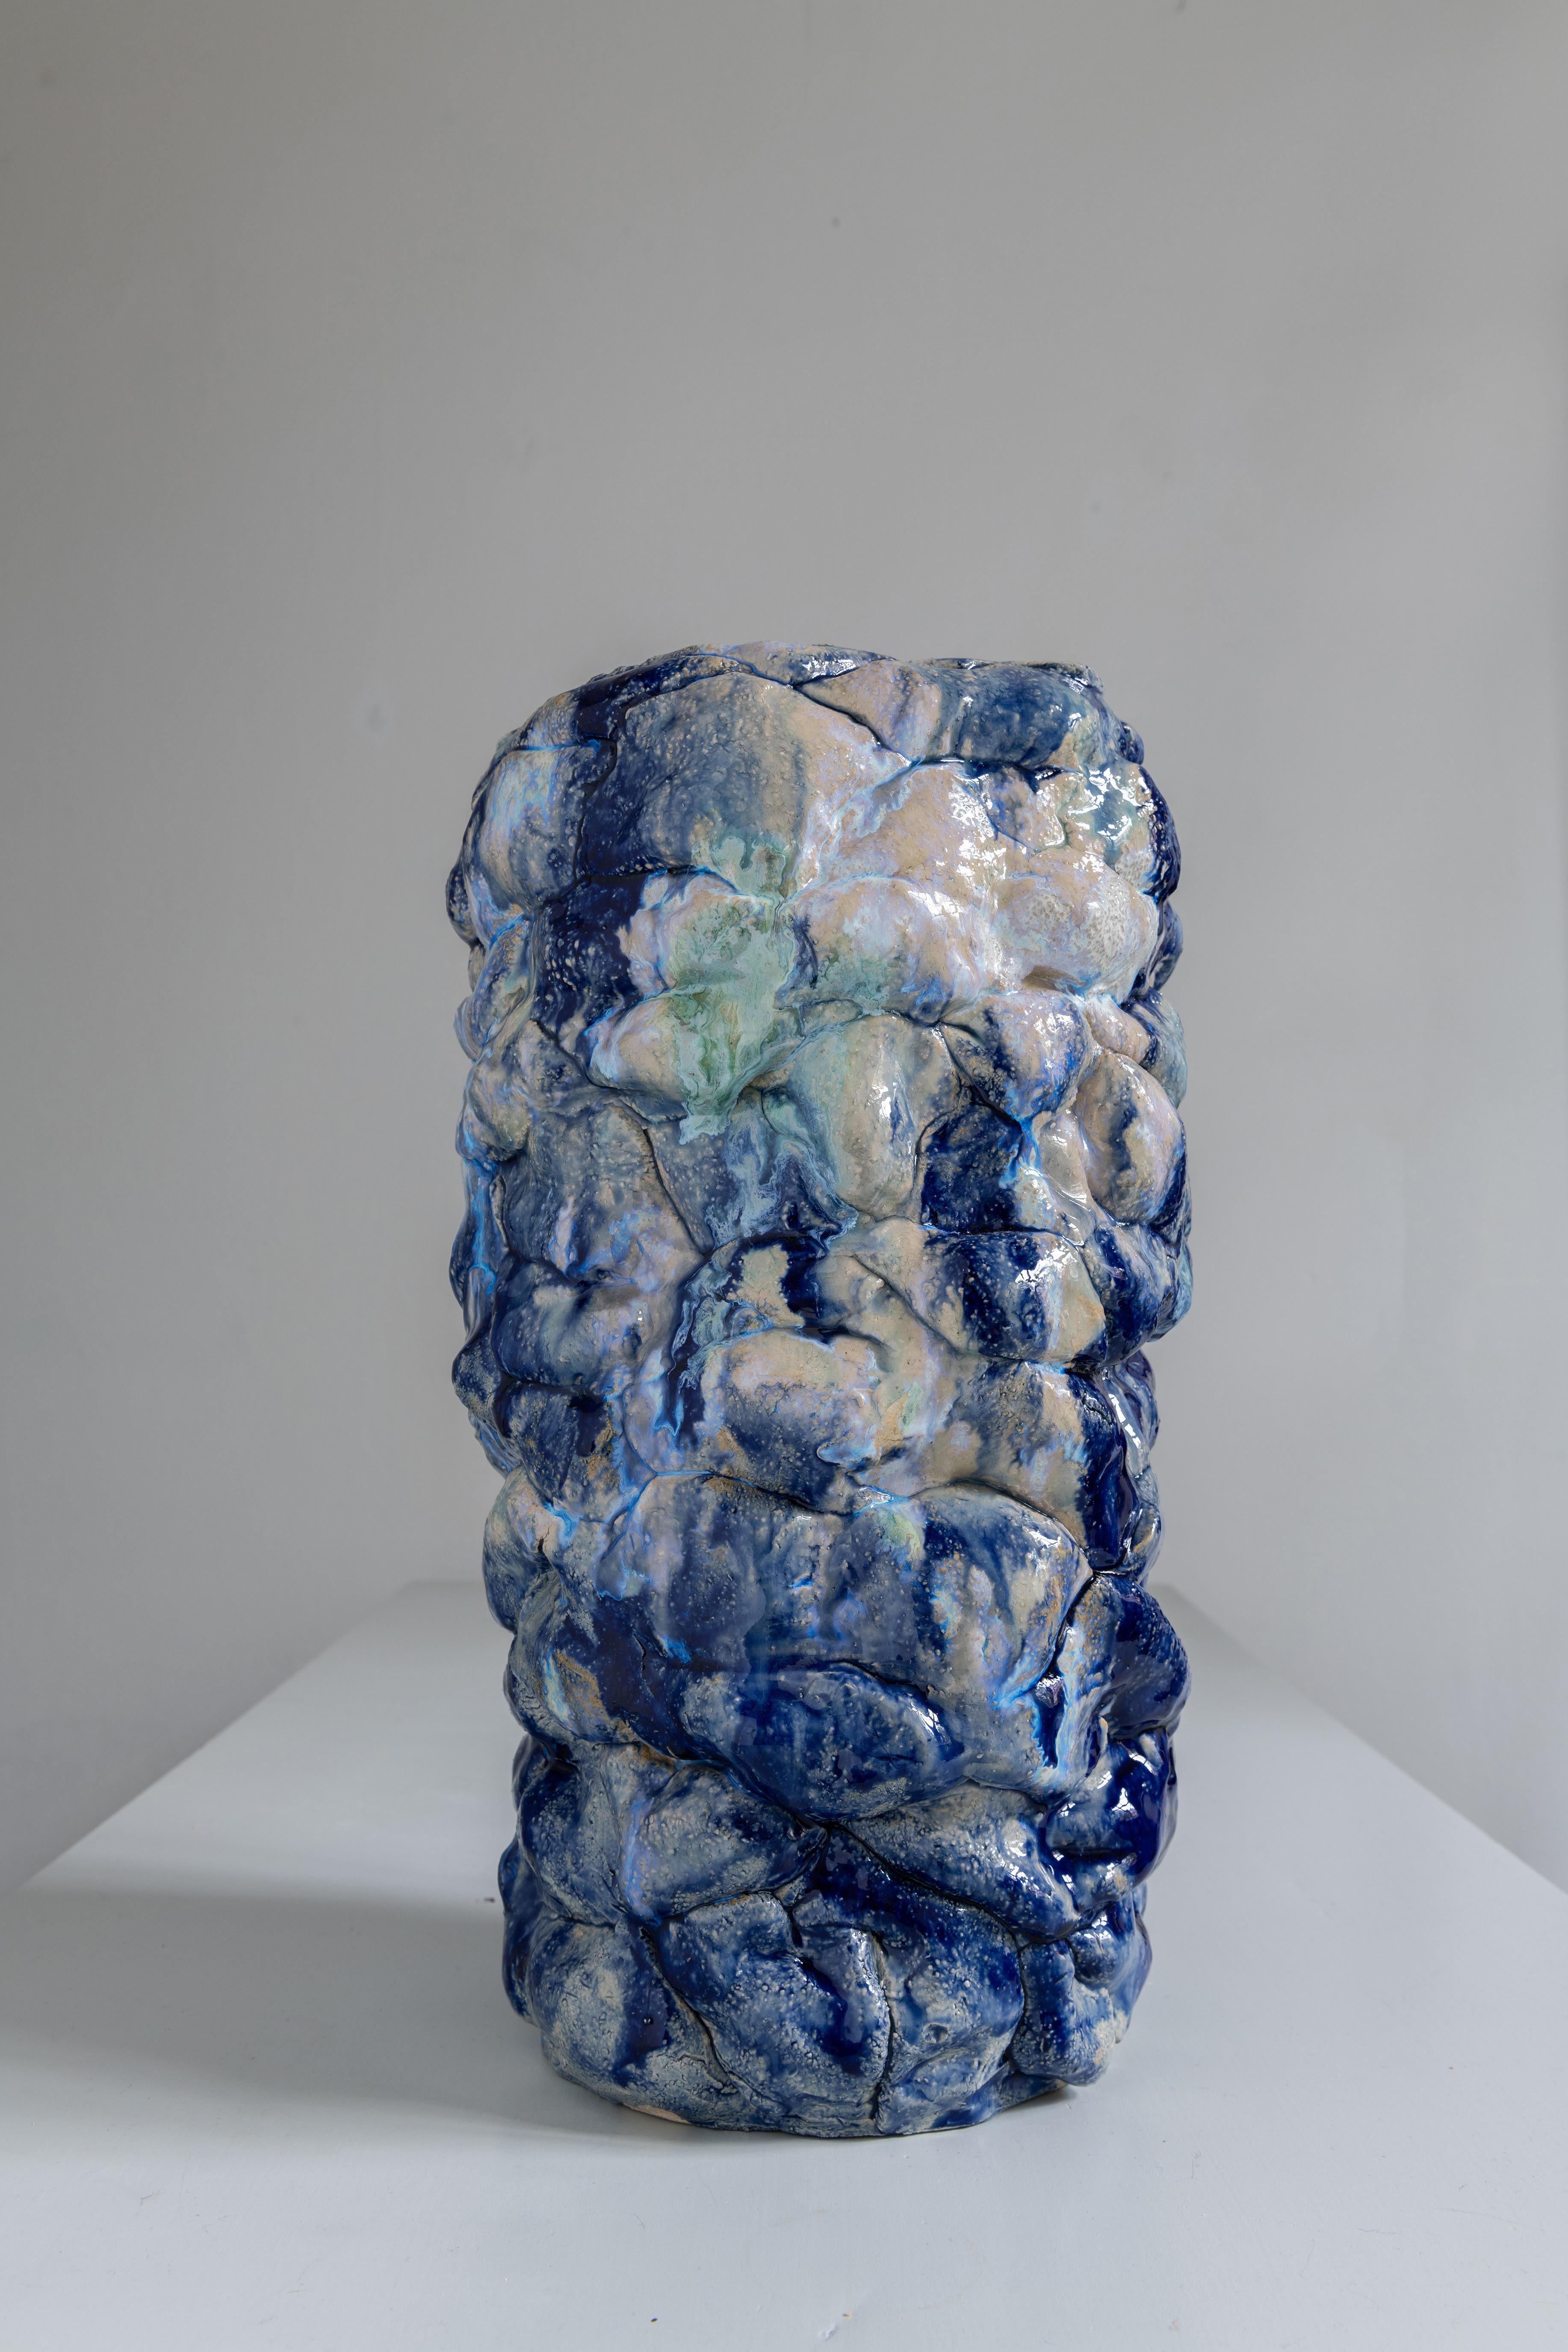 Dark blue sidechair by Natasja Alers, 2021
Dimensions: 42 x 30 cm
Material: ceramics, glazes

Visual artist Natasja Alers (The Hague, 1987) graduated from the Gerrit Rietveld Academy in the field of ceramics. Alers makes casts of human body